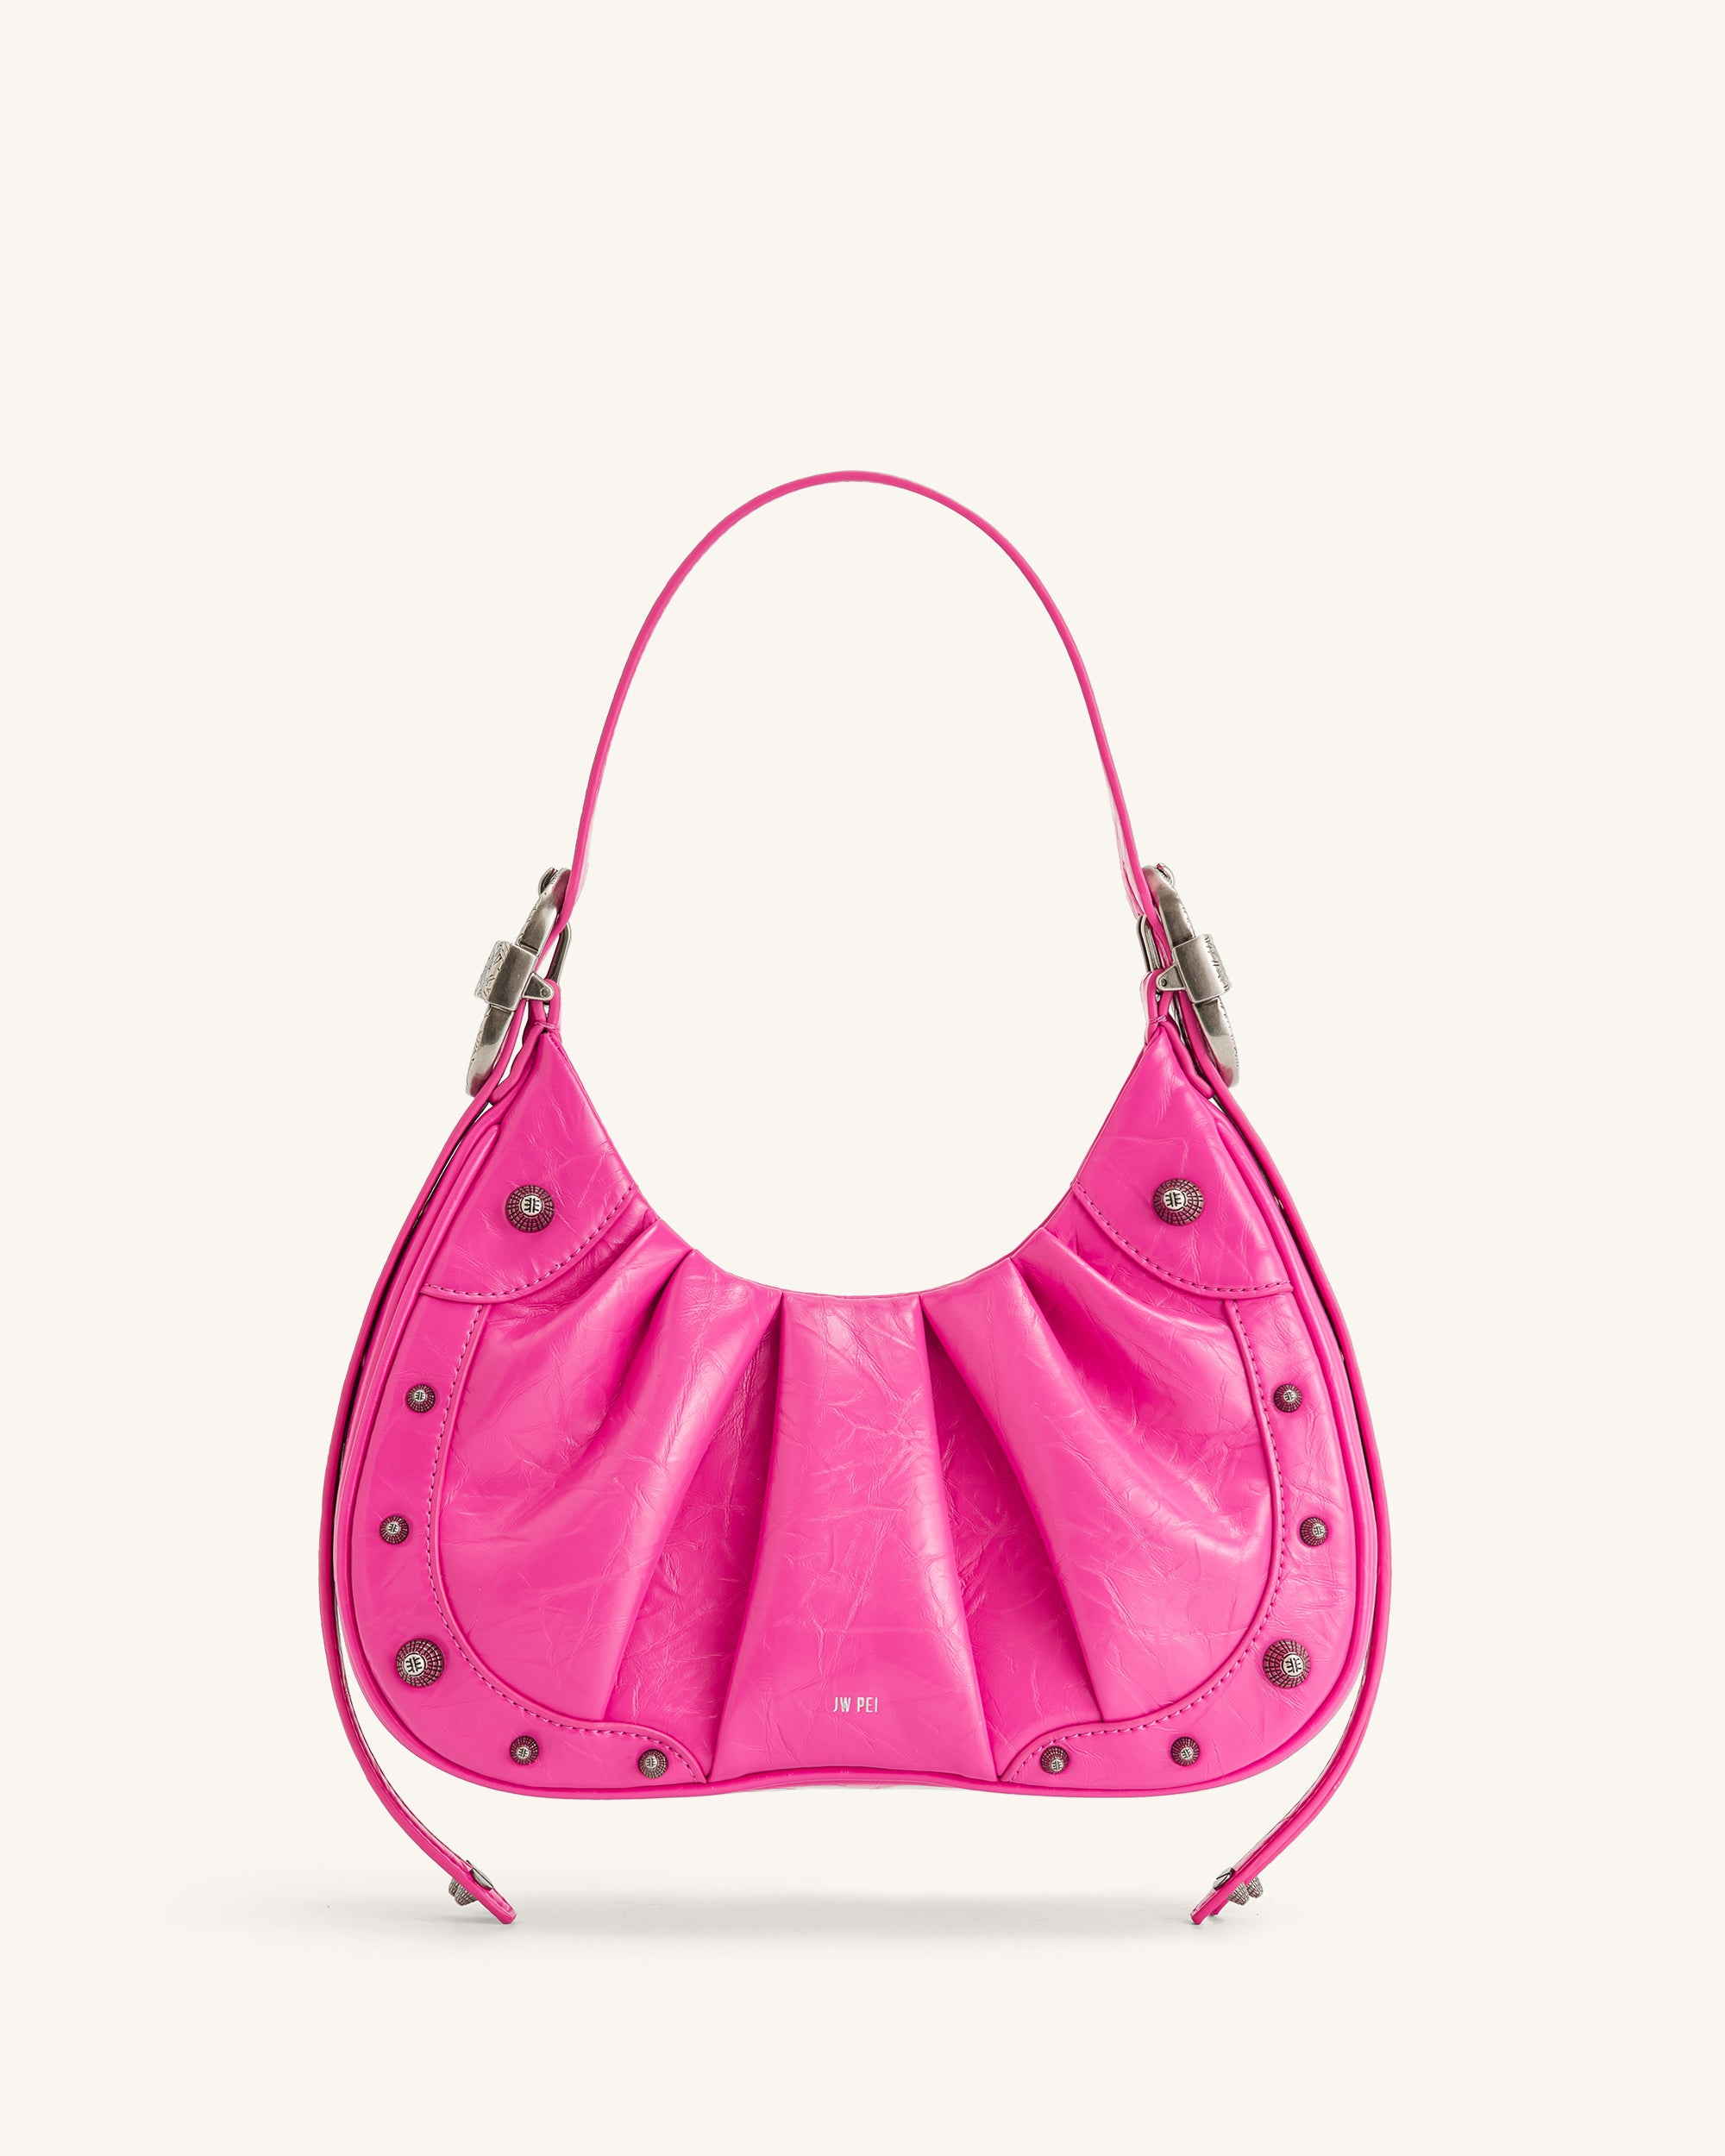 Jw Pei Gabbi Ruched Faux Leather Hobo In Pink